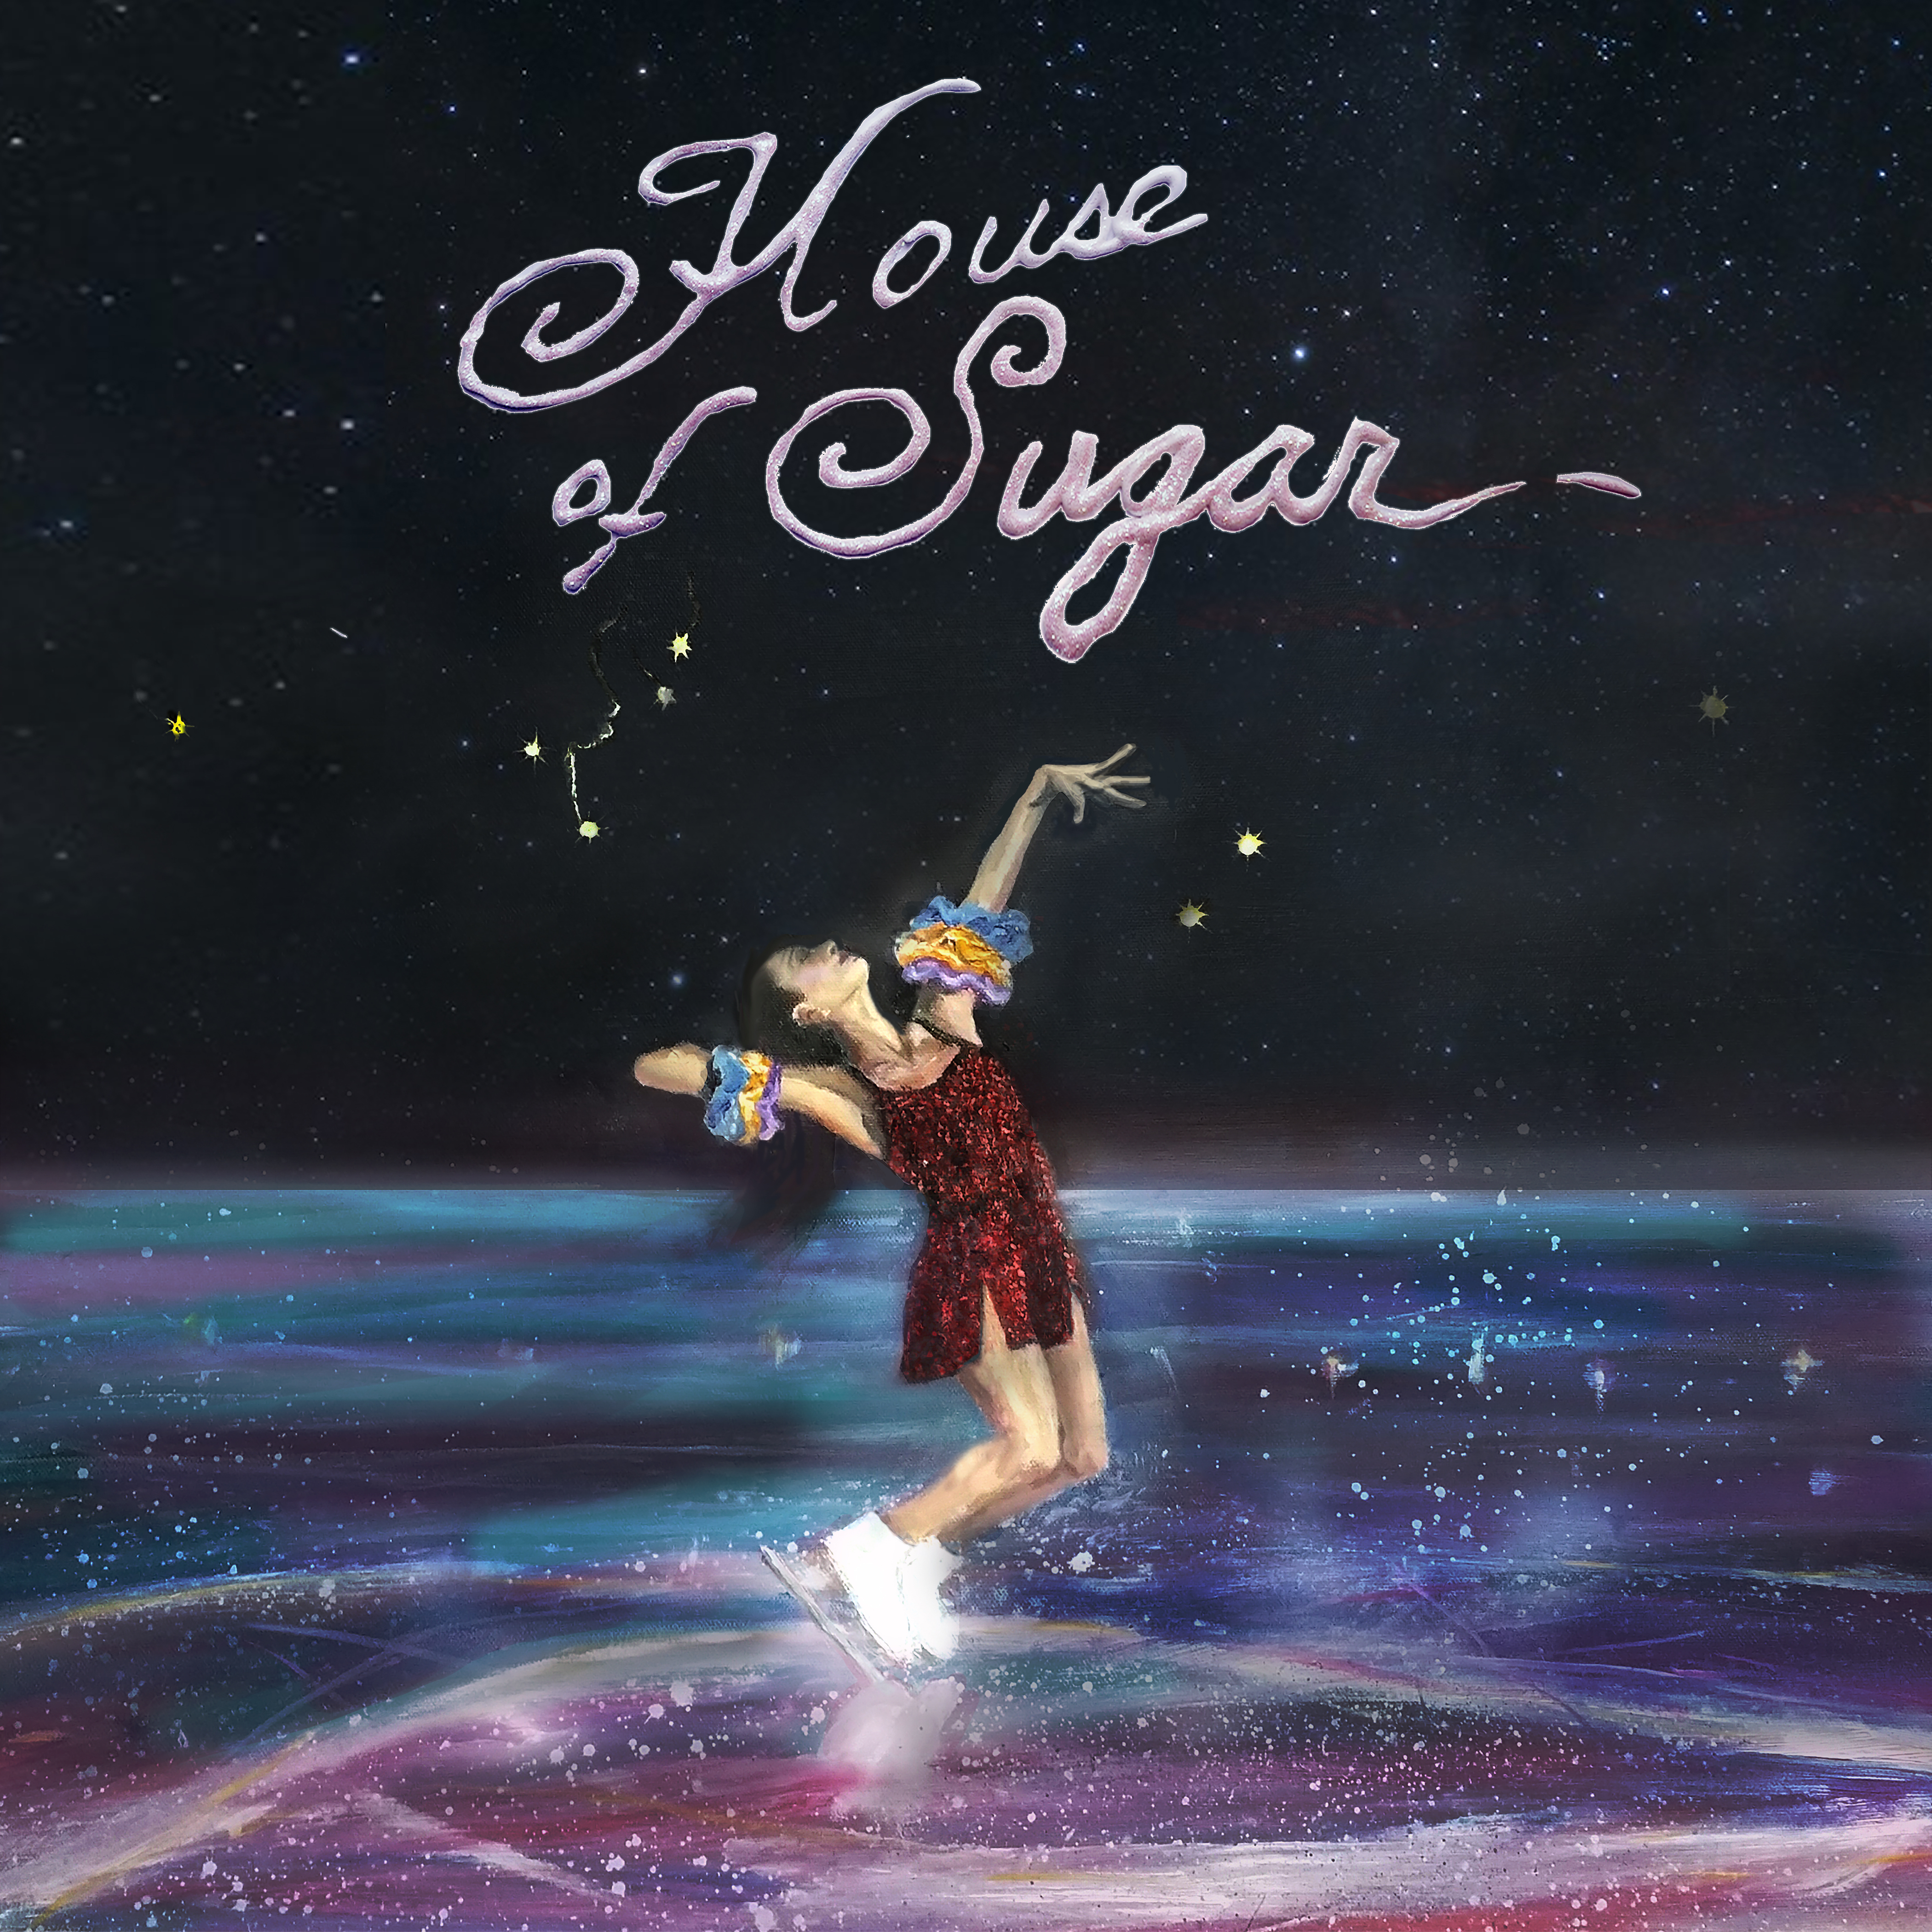 (Sandy) Alex G Announces New Album <i></noscript>House of Sugar</i>, Releases “Gretel”” title=”HouseofSugar-300dpi-1559658385″ data-original-id=”329269″ data-adjusted-id=”329269″ class=”sm_size_full_width sm_alignment_center ” />
<p><em>House of Sugar</em>:</p>
<p>01. “Walk Away”<br />
02. “Hope”<br />
03. “Southern Sky”<br />
04. “Gretel”<br />
05. “Taking”<br />
06. “Near”<br />
07. “Project 2”<br />
08. “Bad Man”<br />
09. “Sugar”<br />
10. “In My Arms”<br />
11. “Cow”<br />
12. “Crime”<br />
13. “SugarHouse” (Live)</p>
</div>
</div>
</div>
</div>
</div>
</section>
<section data-particle_enable=